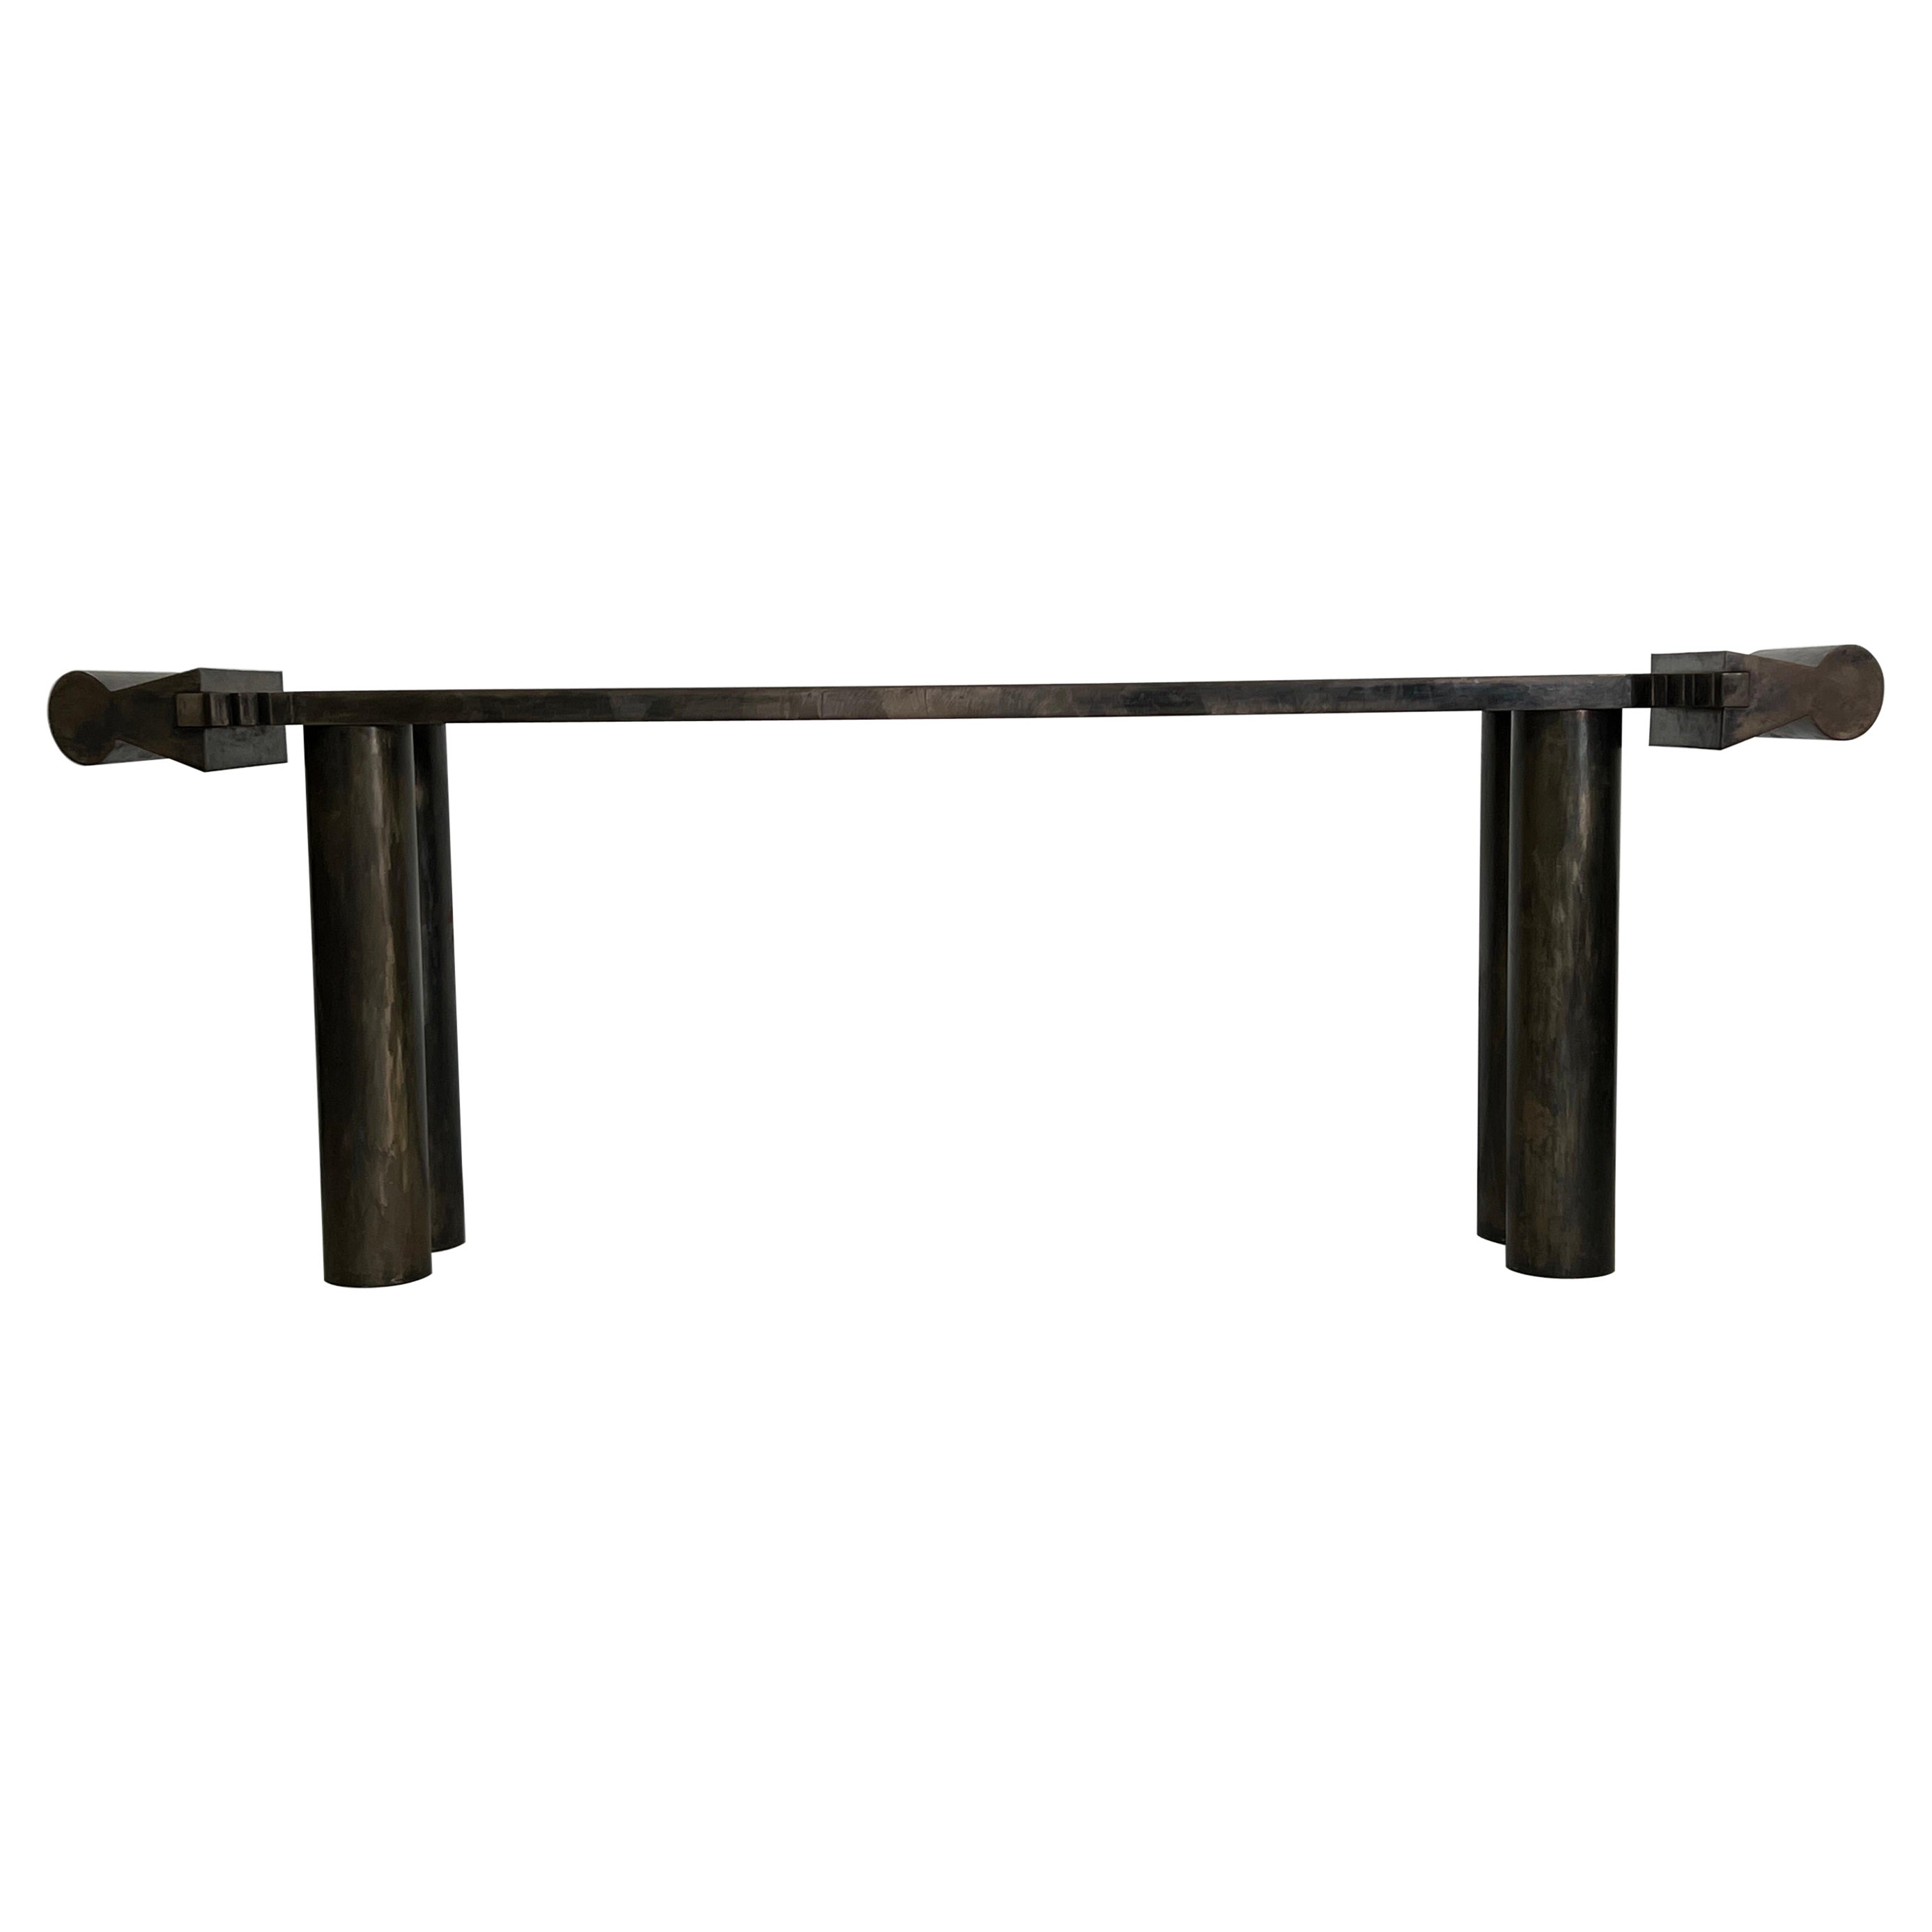 Garry Knox Bennett Steel 'Black Freighter' Console Table, 1990 For Sale